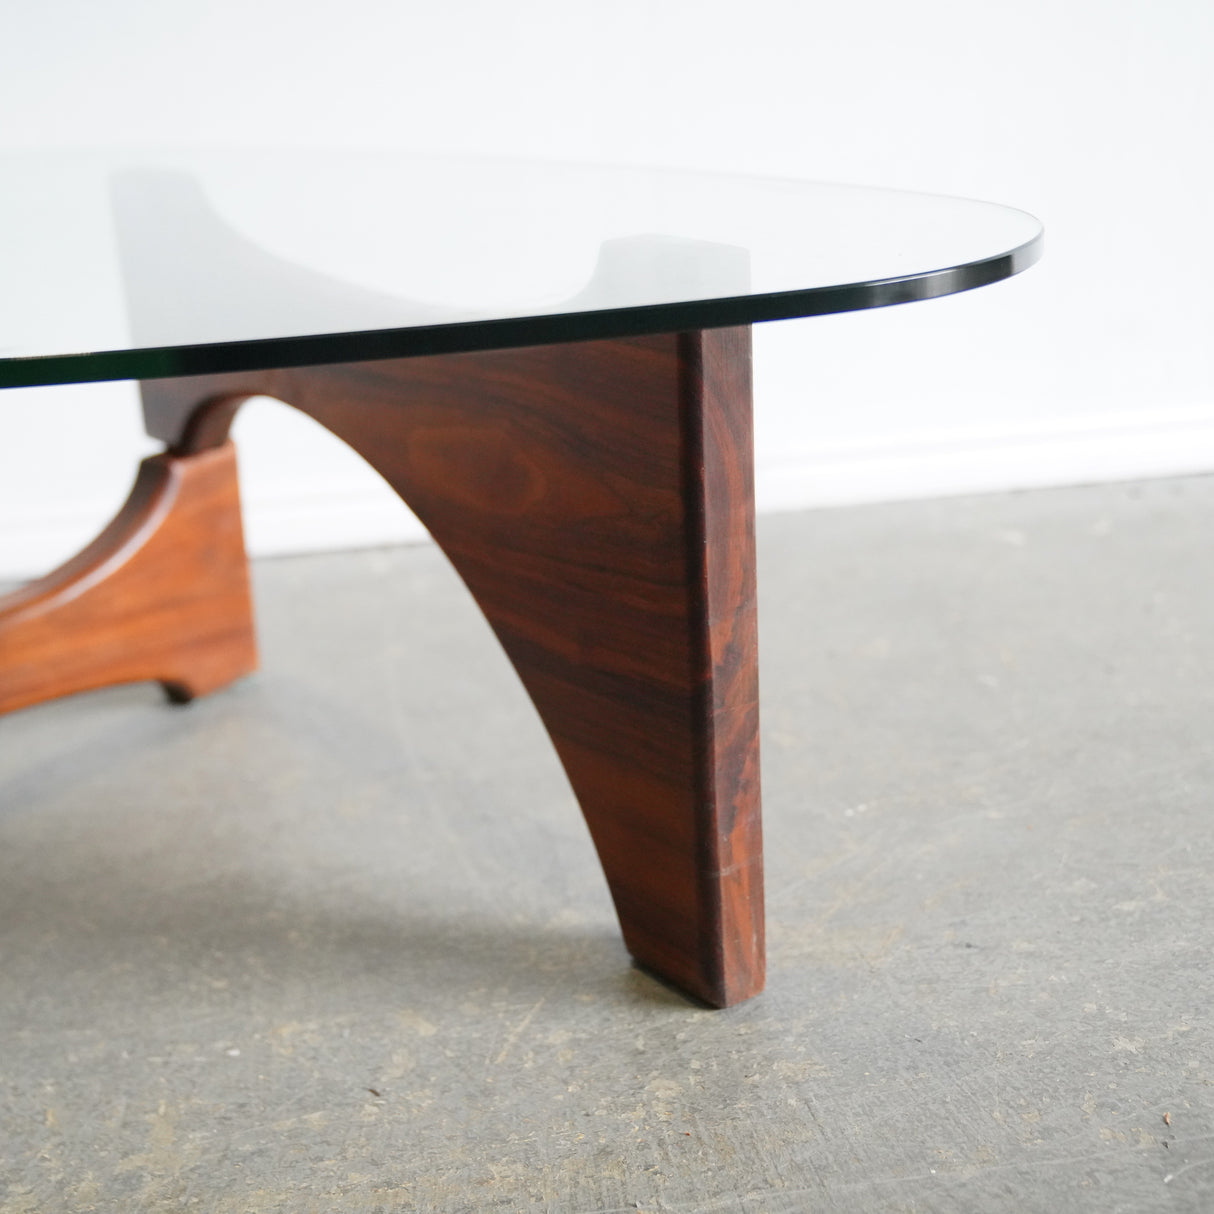 Iconic Adrian Pearsall Triangular Coffee Table for Craft Associates